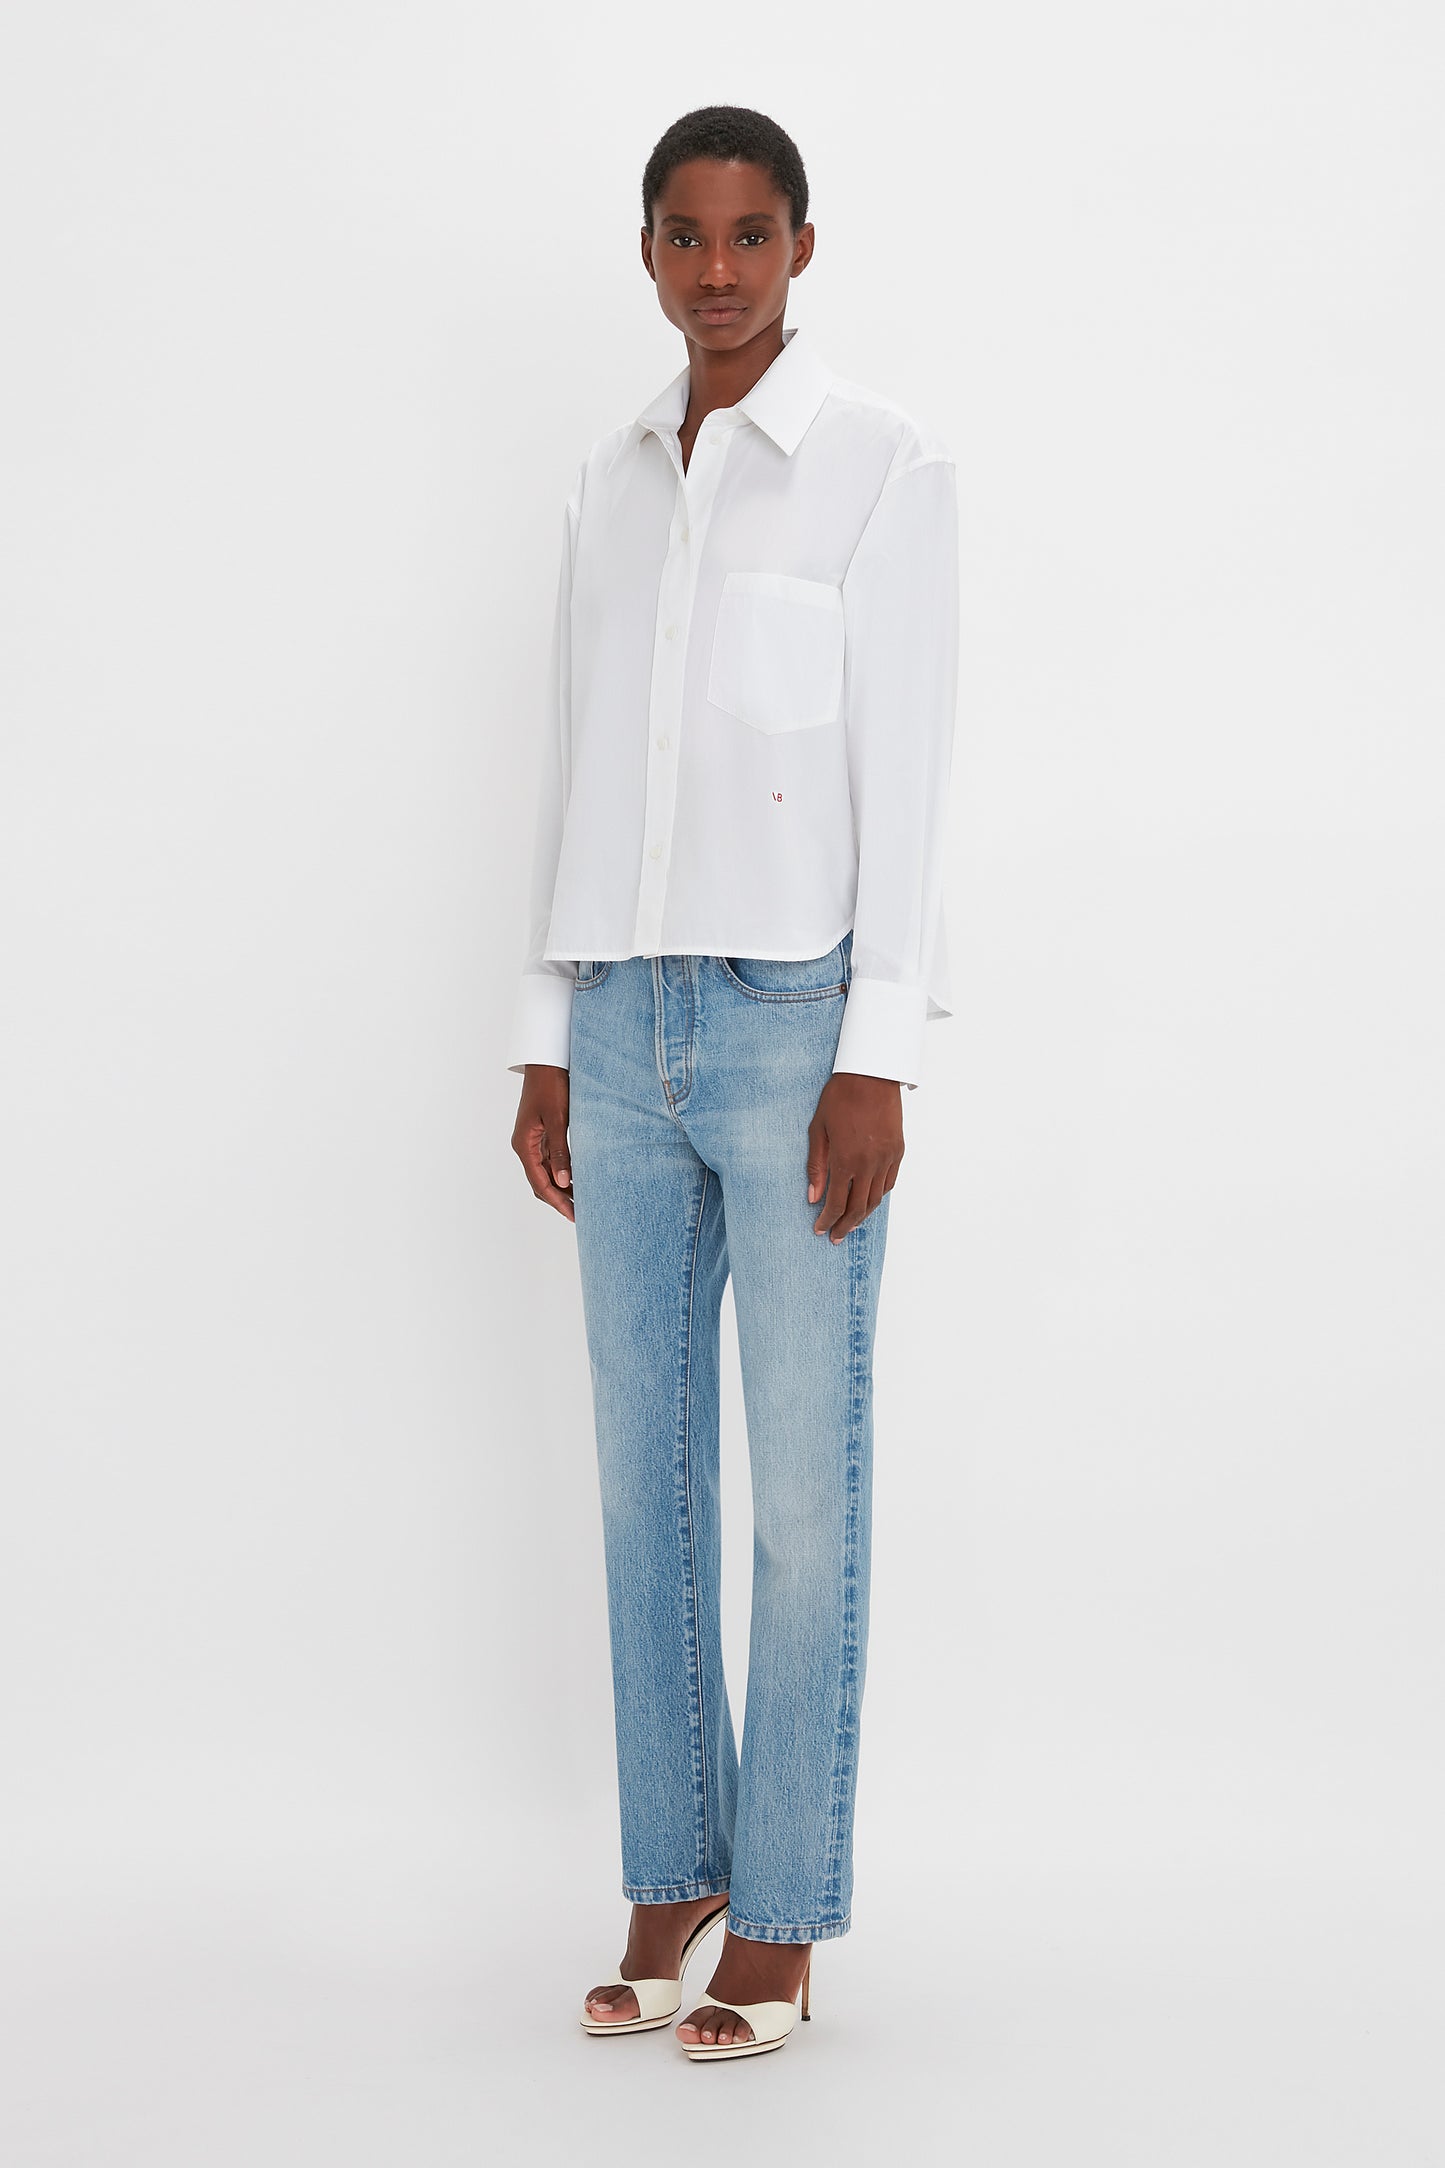 A black woman in a Victoria Beckham classic white shirt and blue jeans, standing against a plain white background. She is wearing silver heels.